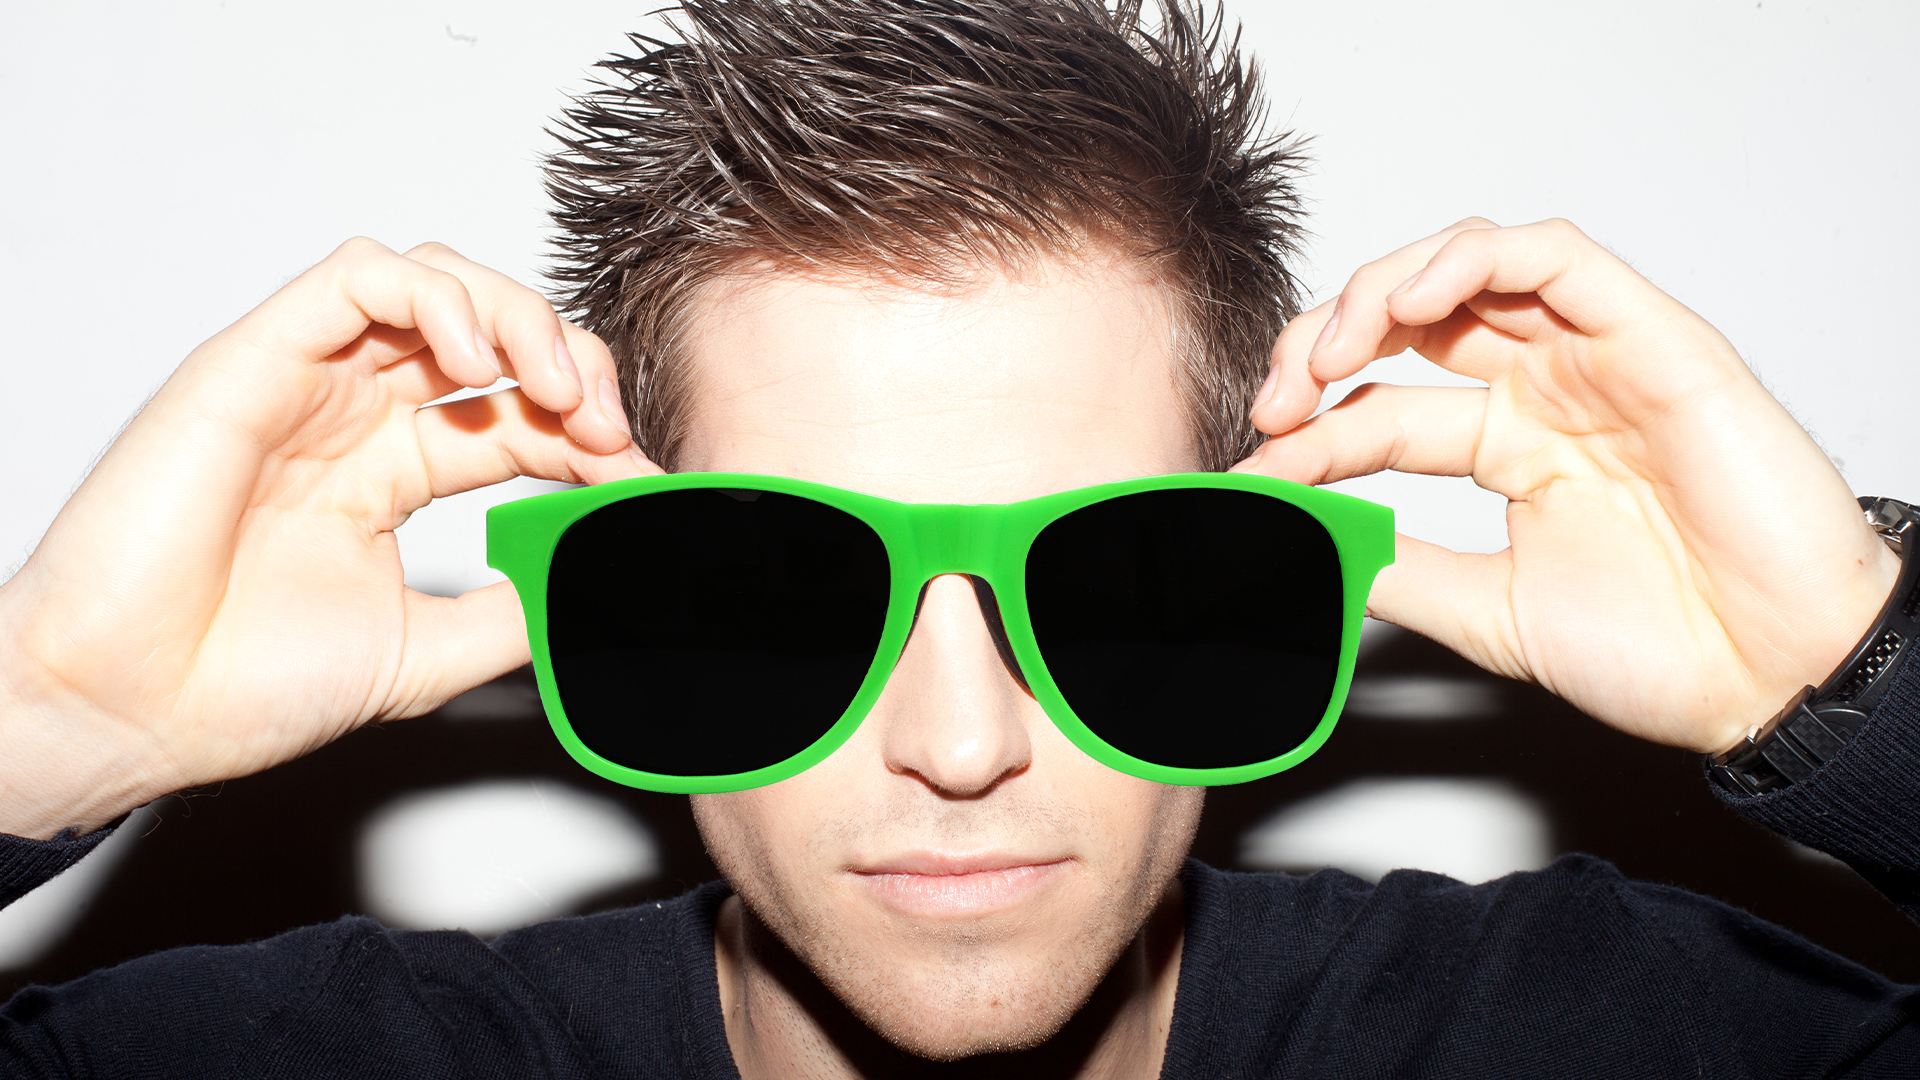 Guy in sunglasses with big spiky hair